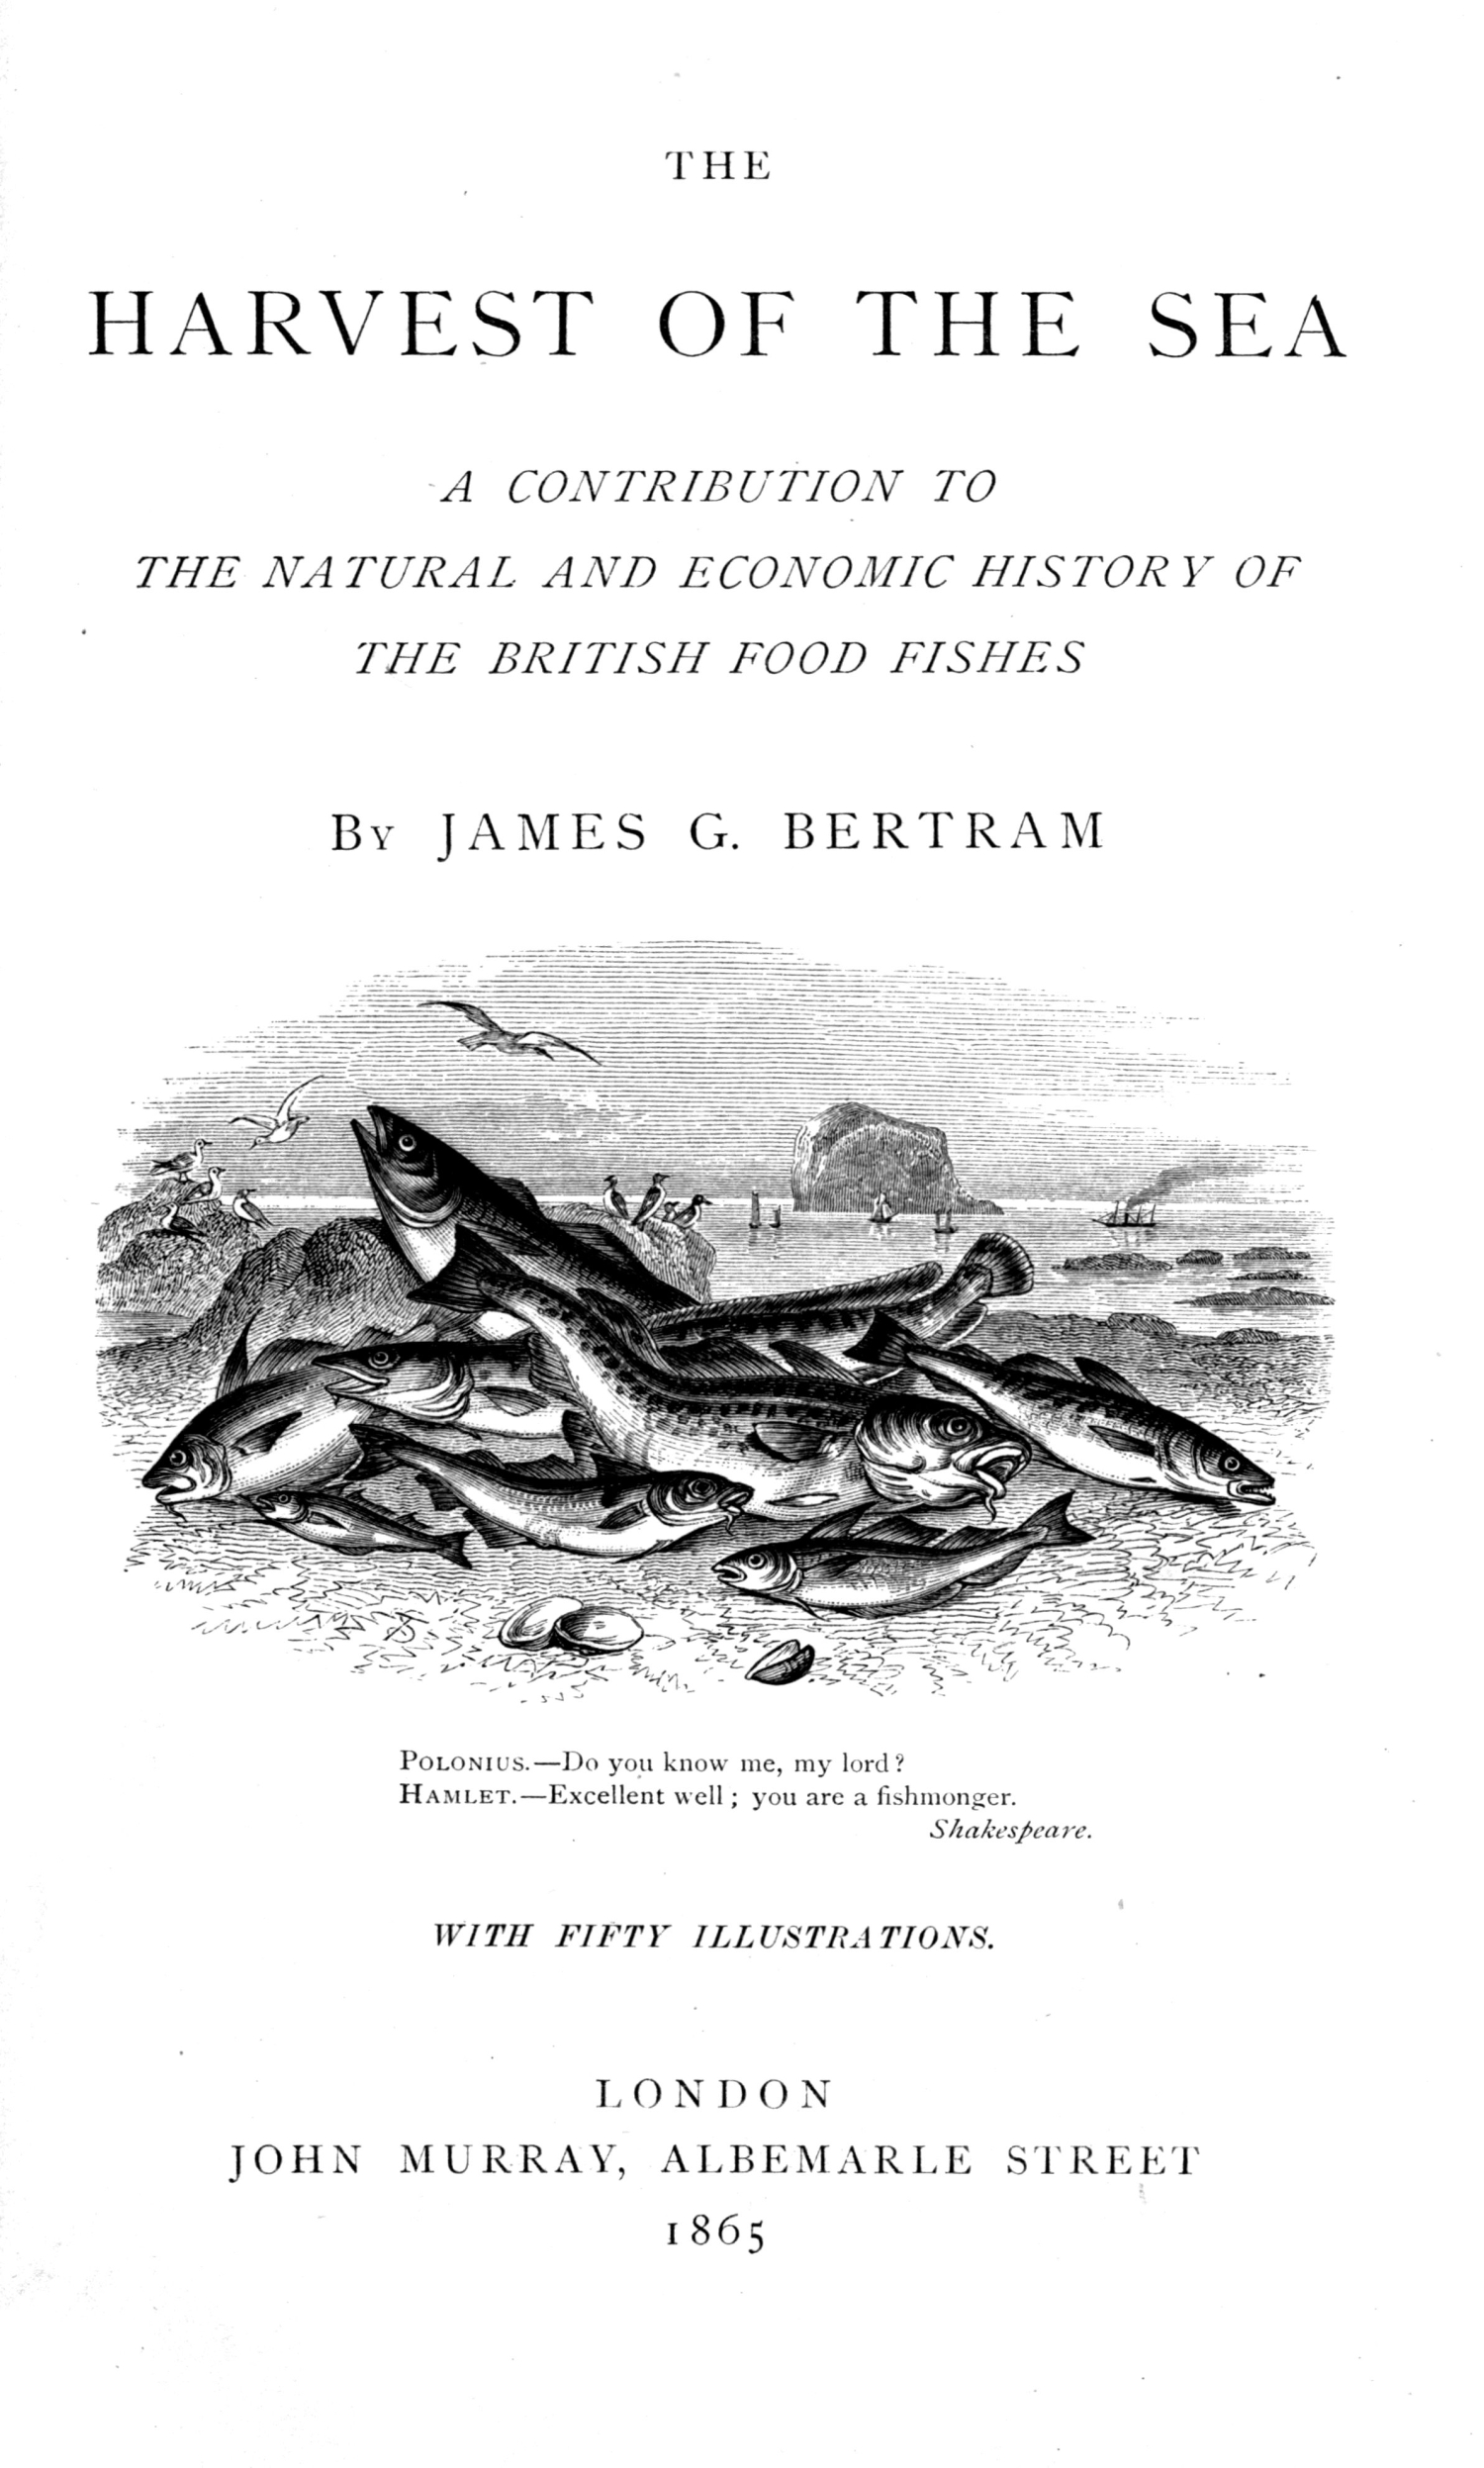 The Harvest of the Sea, by James G. Bertram—A Project Gutenberg eBook